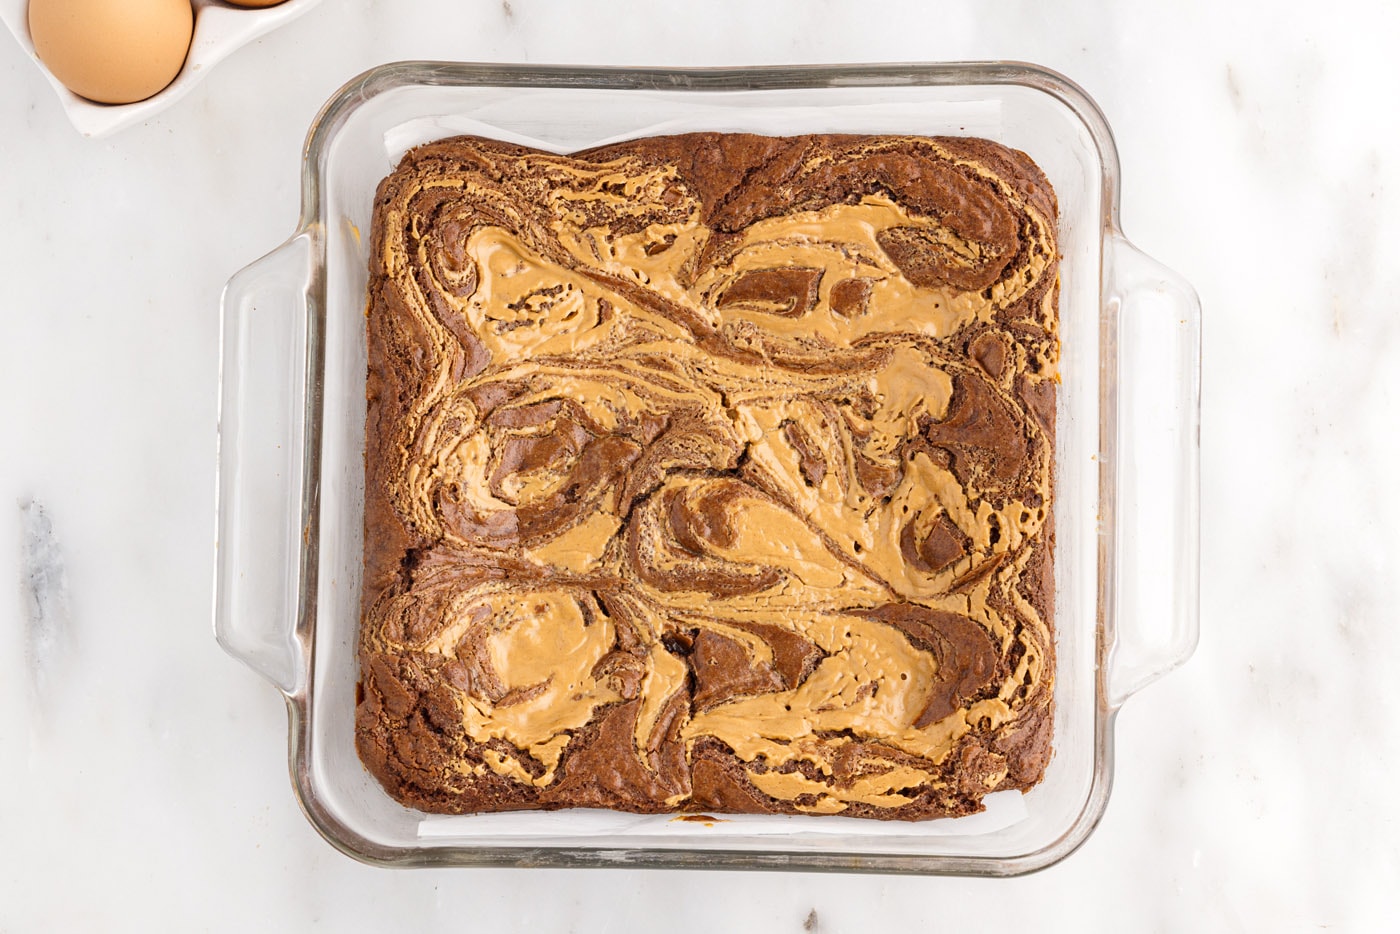 peanut butter brownies baked in a glass pan